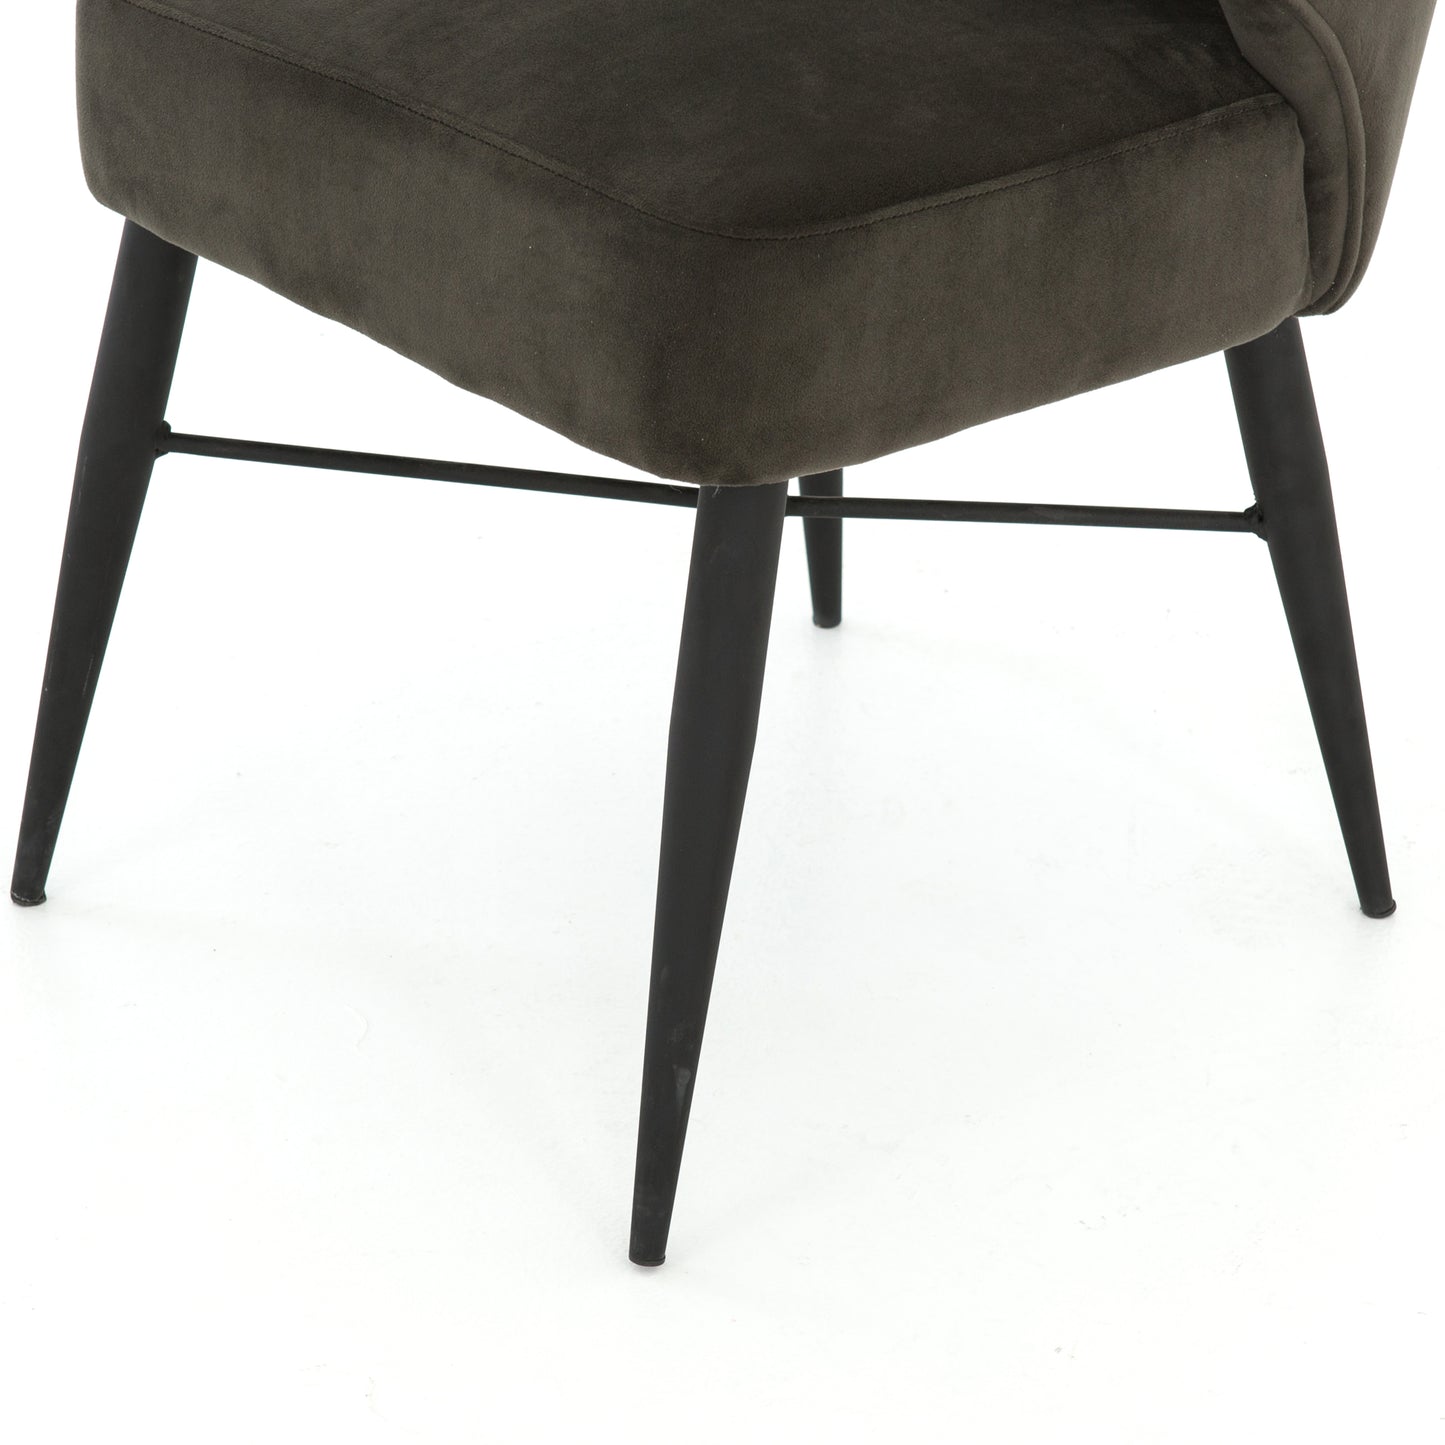 Load image into Gallery viewer, Arianna Dining Chair - Bella Smoke Dining Chair Four Hands     Four Hands, Mid Century Modern Furniture, Old Bones Furniture Company, Old Bones Co, Modern Mid Century, Designer Furniture, https://www.oldbonesco.com/
